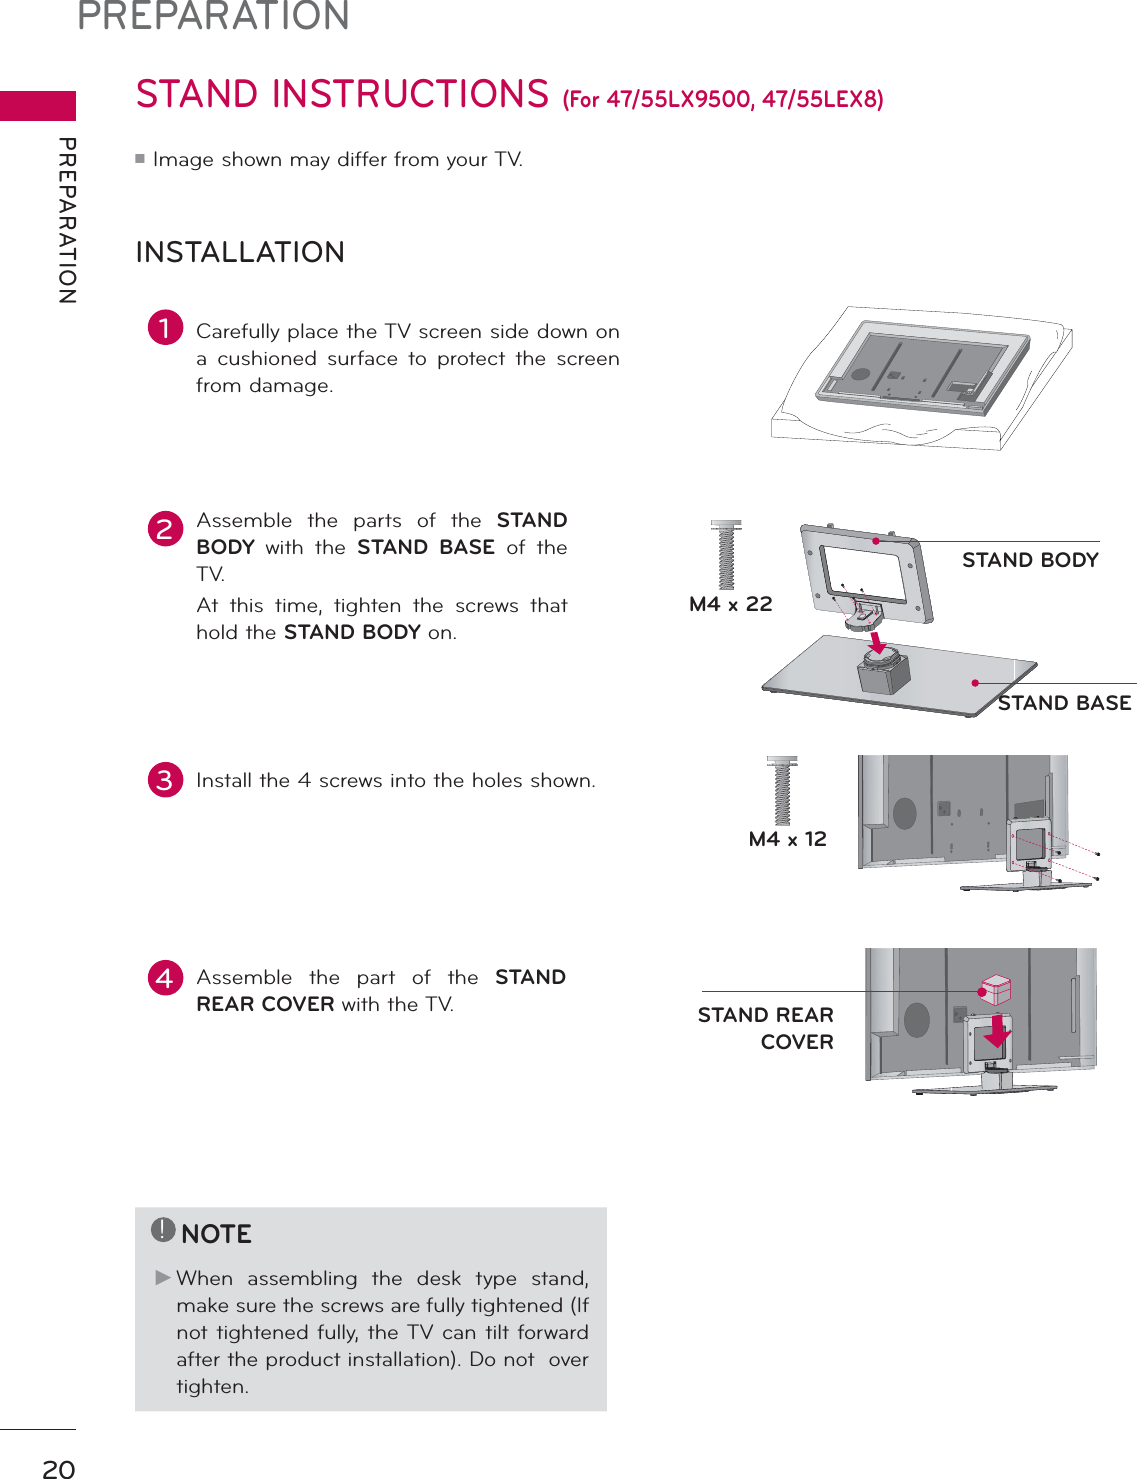 PREPARATIONPREPARATION20STAND INSTRUCTIONS (For 47/55LX9500, 47/55LEX8)ᯫImage shown may differ from your TV.INSTALLATION!NOTEŹWhen assembling the desk type stand, make sure the screws are fully tightened (If not tightened fully, the TV can tilt forward after the product installation). Do not  over tighten.2Assemble the parts of the STAND BODY with the STAND BASE of the TV.At this time, tighten the screws that hold the STAND BODY on.1Carefully place the TV screen side down on a cushioned surface to protect the screen from damage.4Assemble the part of the STAND REAR COVER with the TV.3Install the 4 screws into the holes shown.M4 x 22M4 x 12STAND BODYSTAND BASESTAND REAR COVER